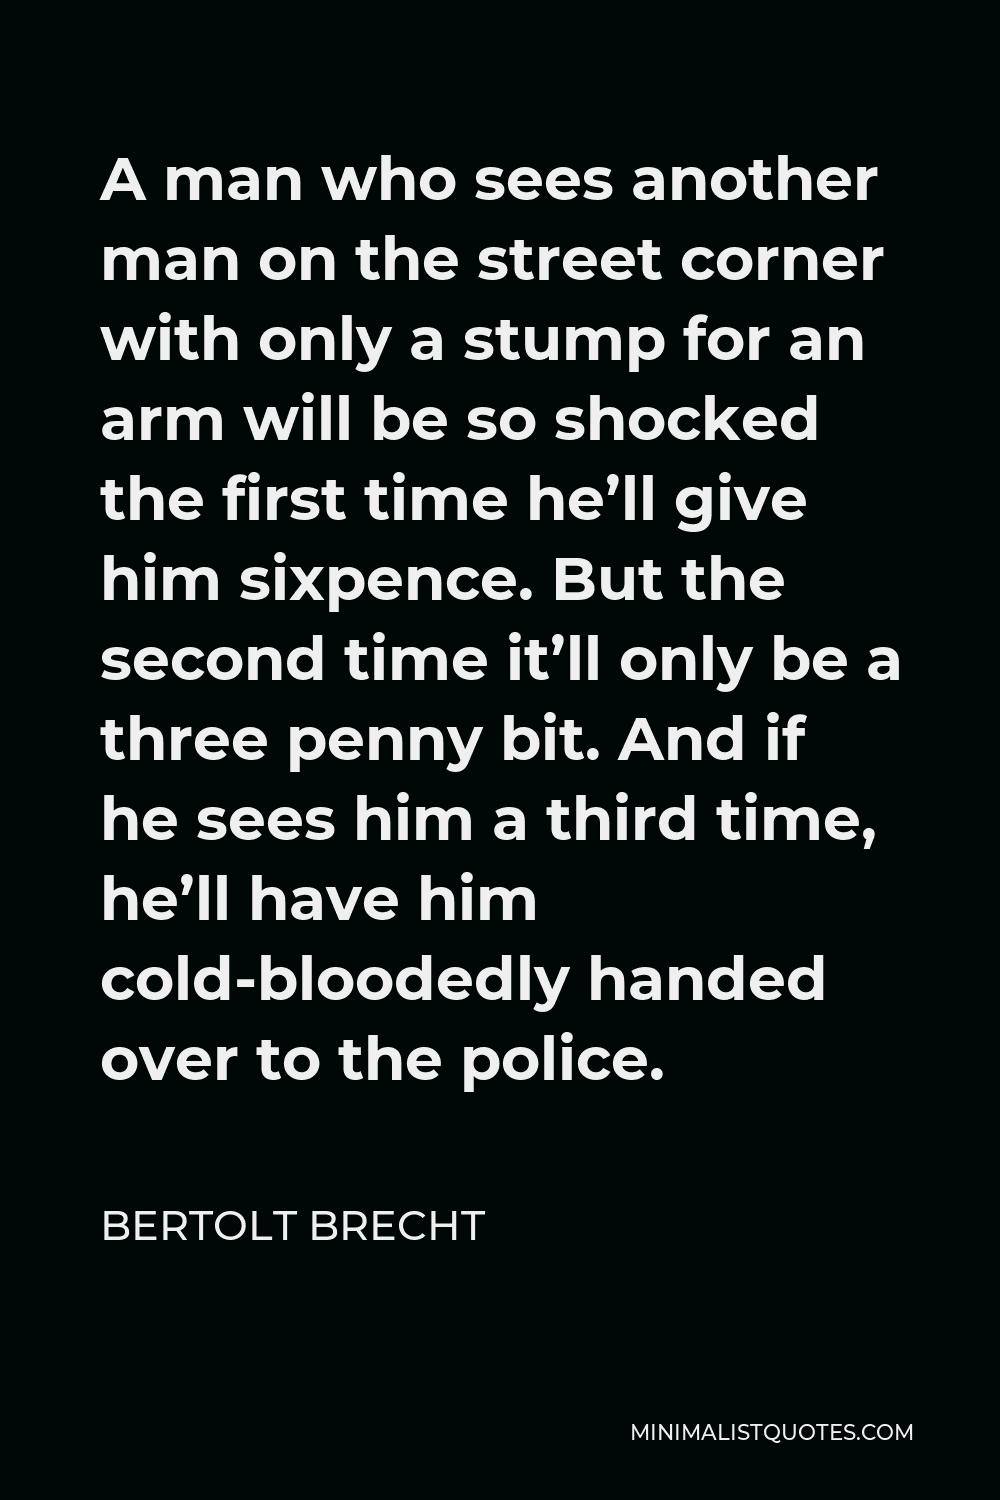 Bertolt Brecht Quote - A man who sees another man on the street corner with only a stump for an arm will be so shocked the first time he’ll give him sixpence. But the second time it’ll only be a three penny bit. And if he sees him a third time, he’ll have him cold-bloodedly handed over to the police.